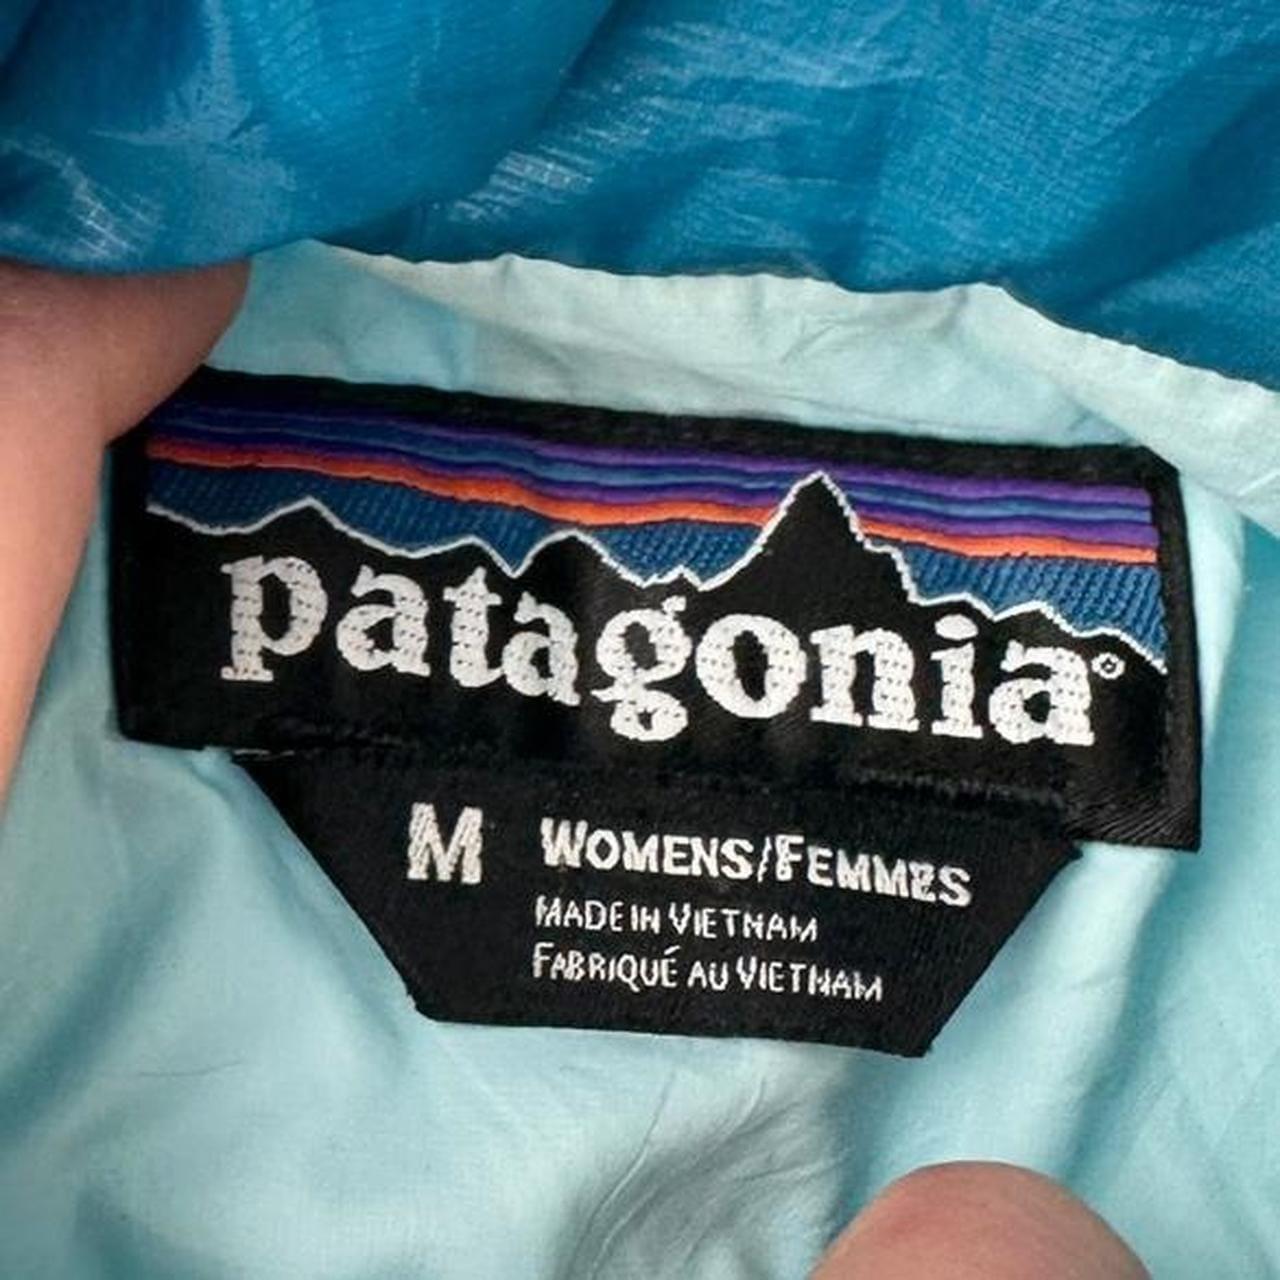 Vintage Patagonia quilted jacket woman’s size M - Known Source